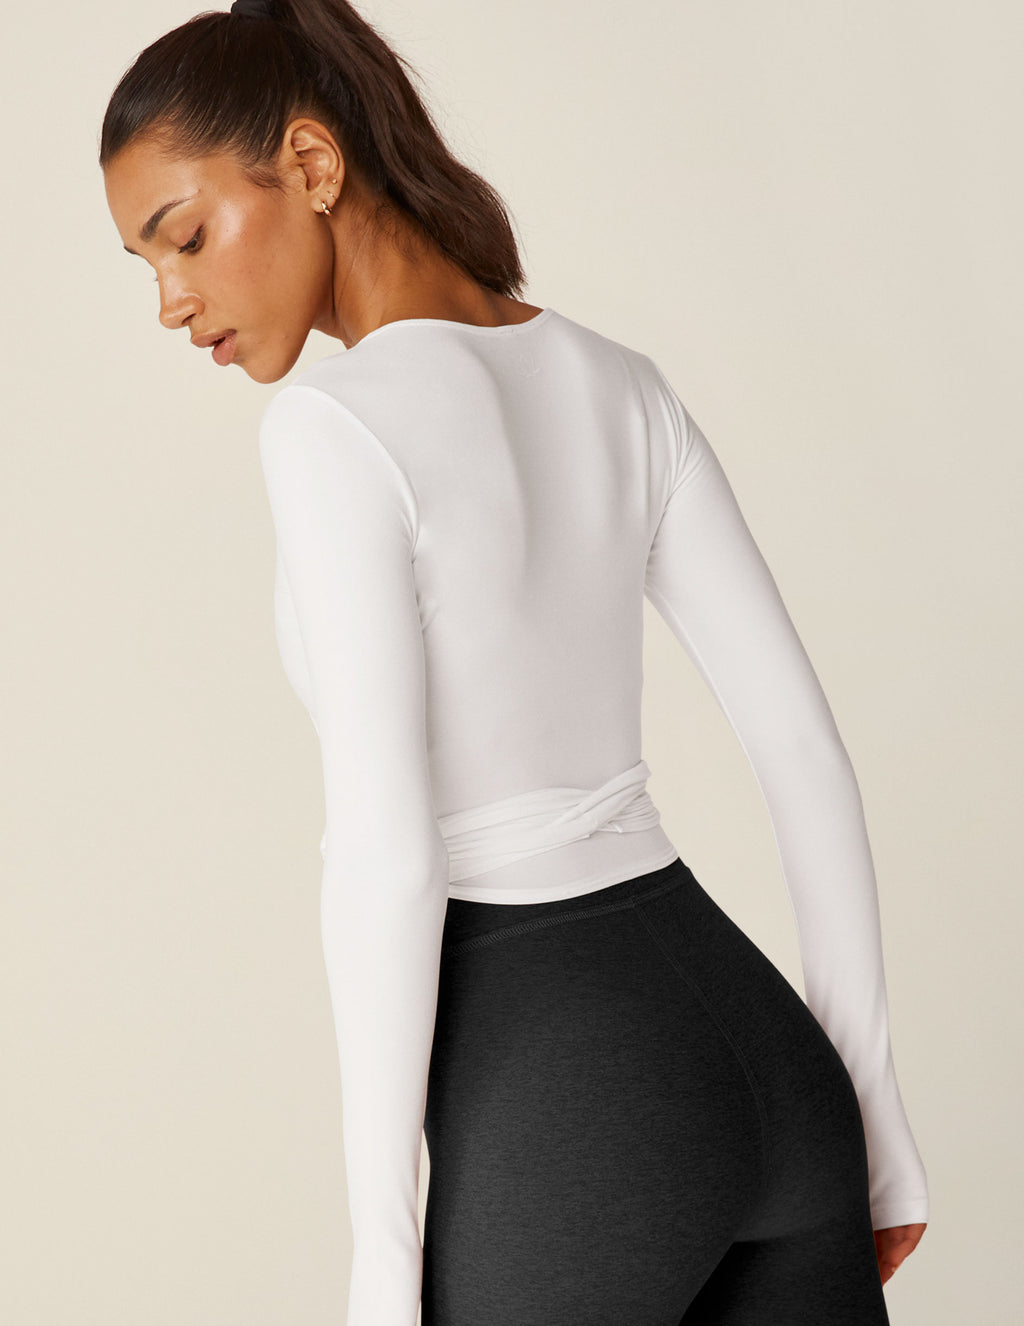 Featherweight Waist No Time Wrap Top Secondary Image